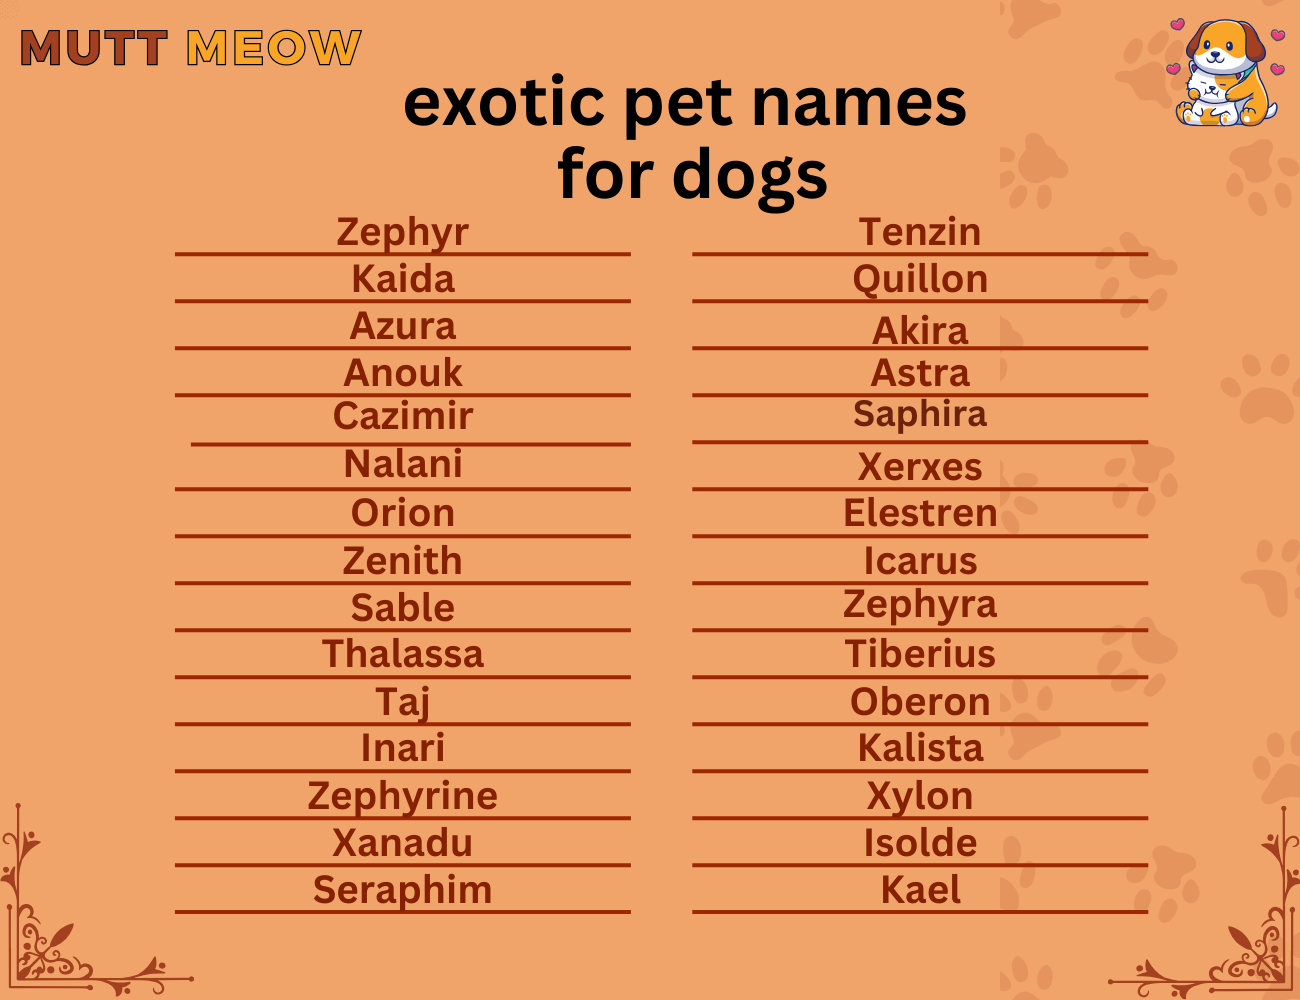 Exotic Pet Names For Dogs - Mutt Meow